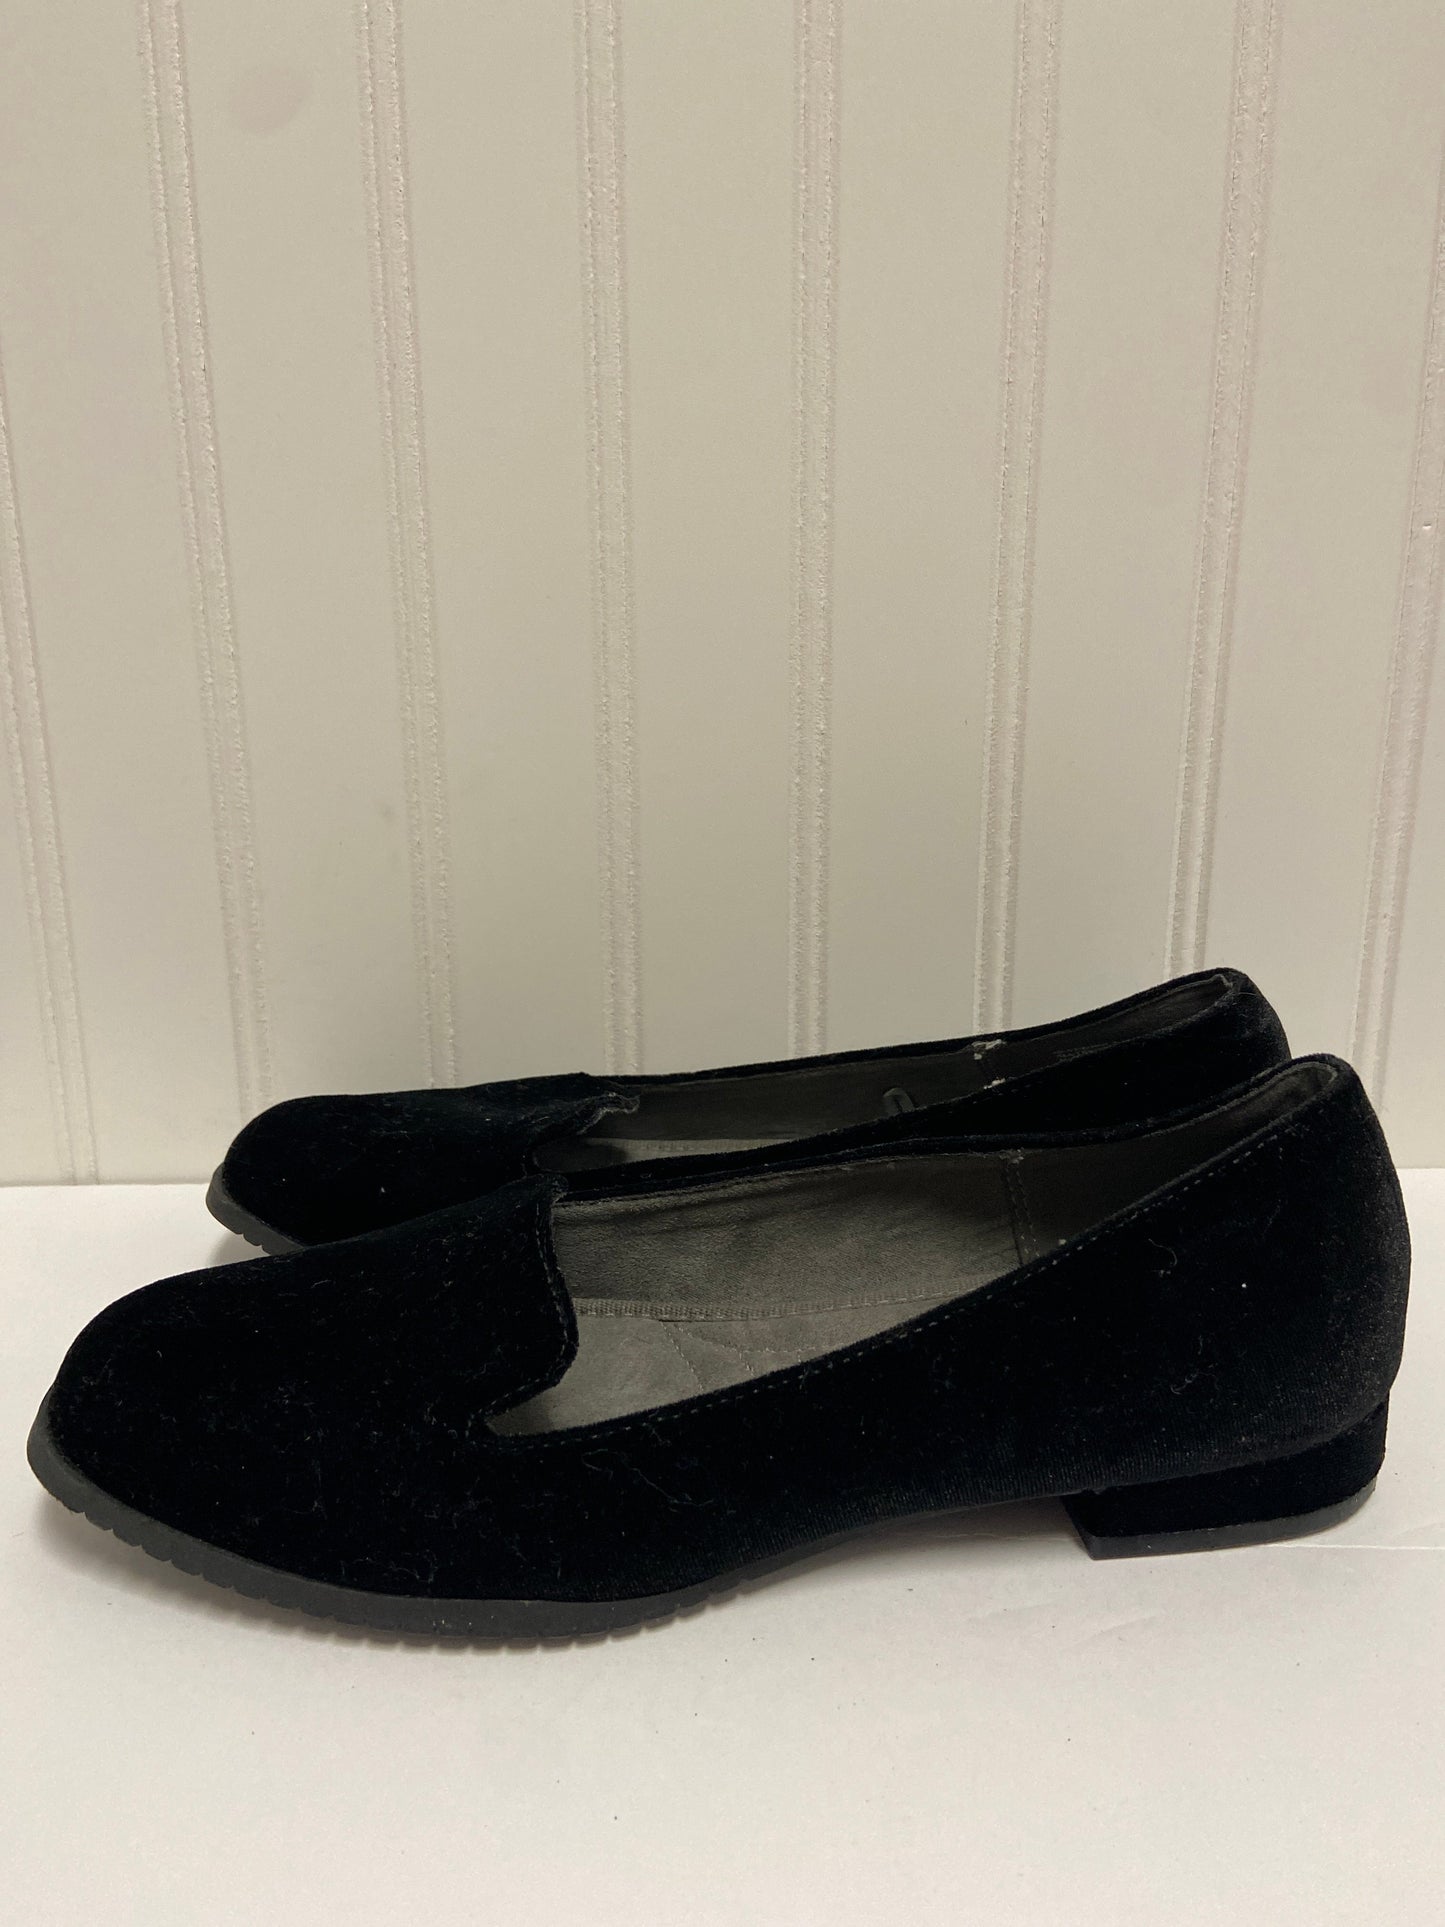 Shoes Flats By Adrienne Vittadini  Size: 7